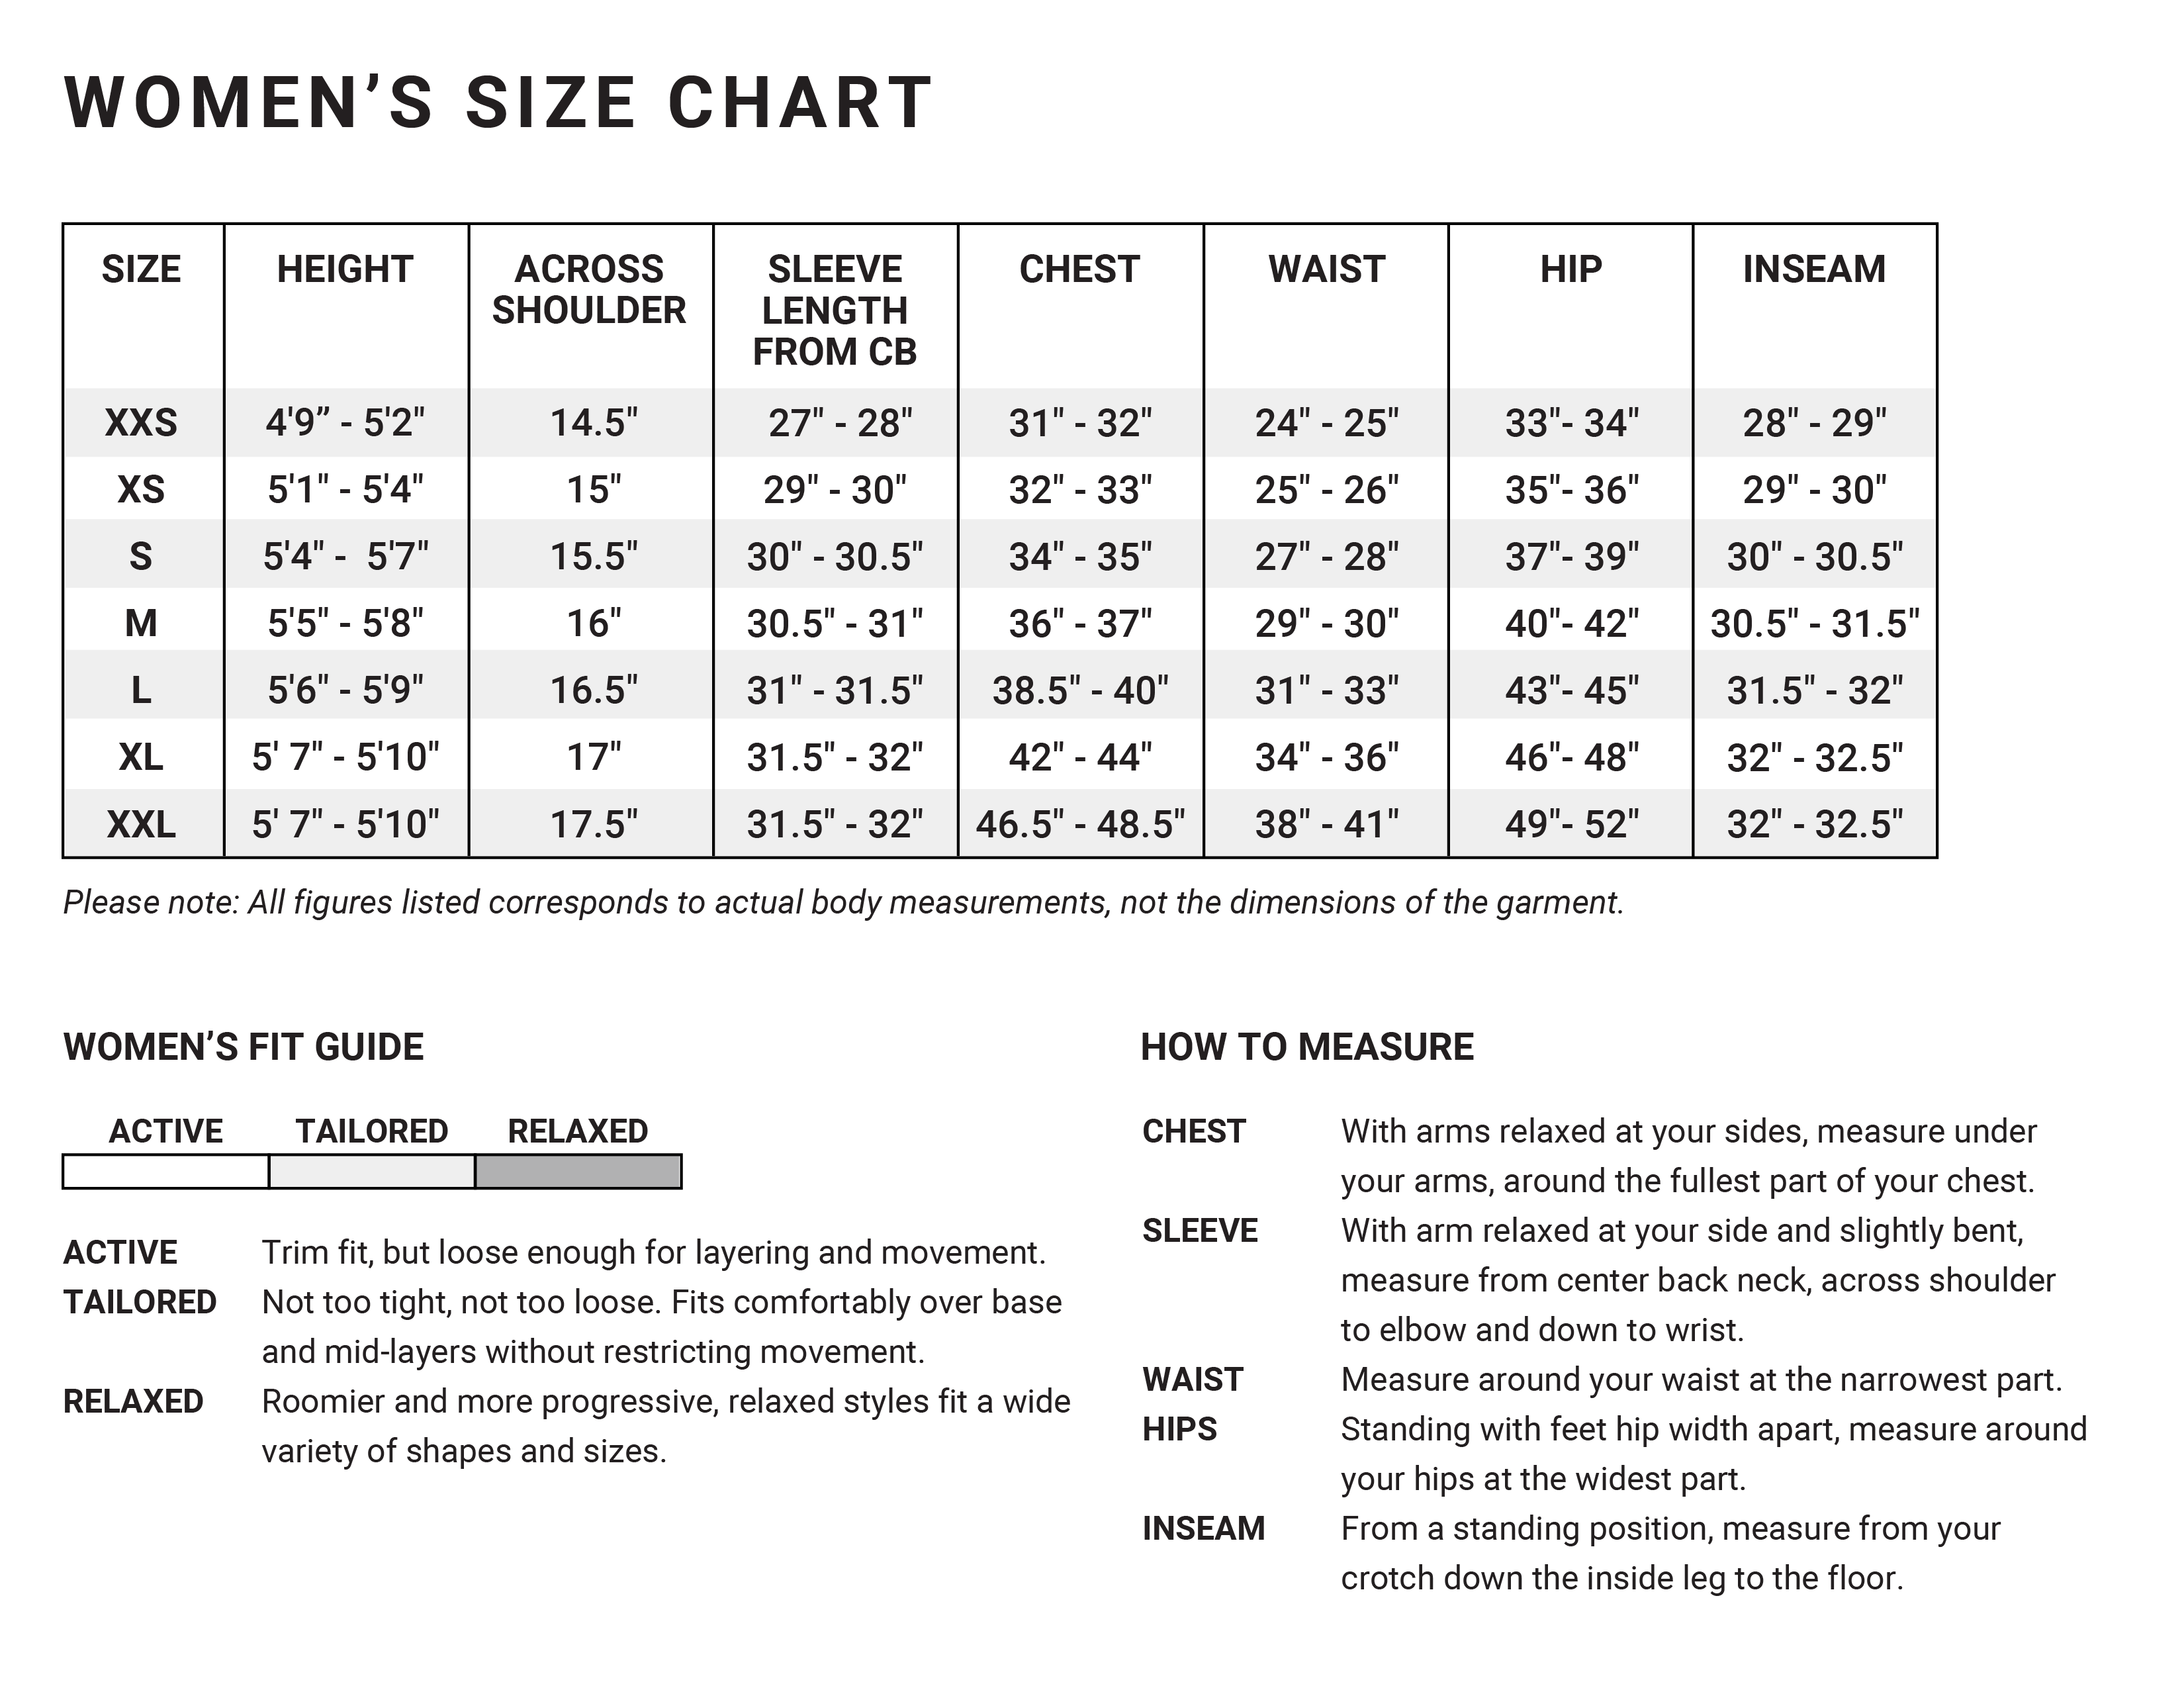 Outerwear Fit & Jacket Length Guide